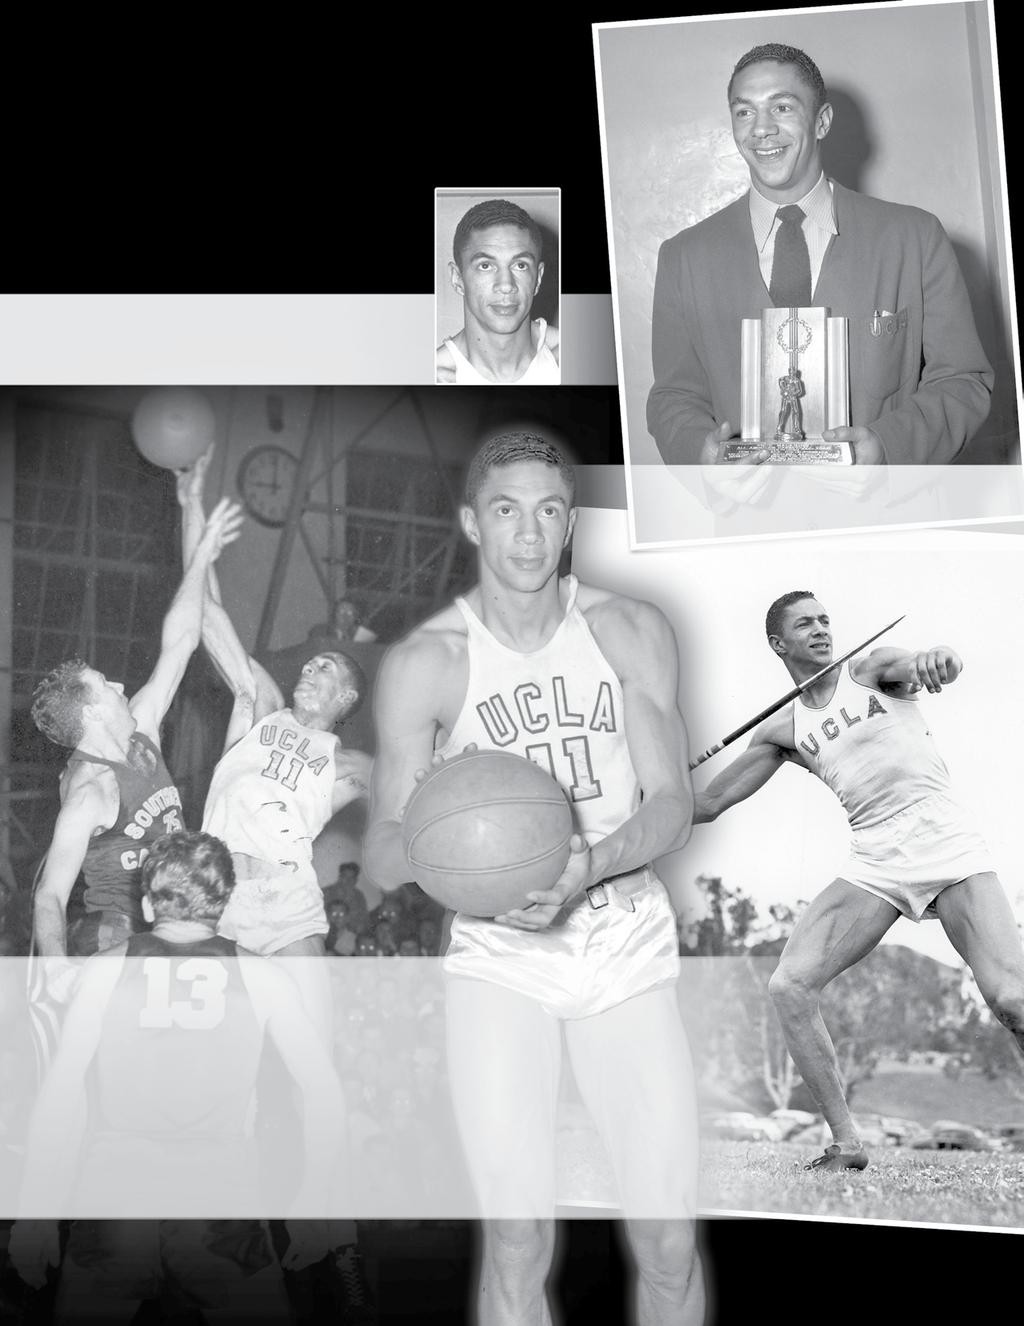 A legendary African-American sports pioneer, Don Barksdale was one of UCLA s early superstar basketball performers who could aptly be described as the Jackie Robinson of basketball.